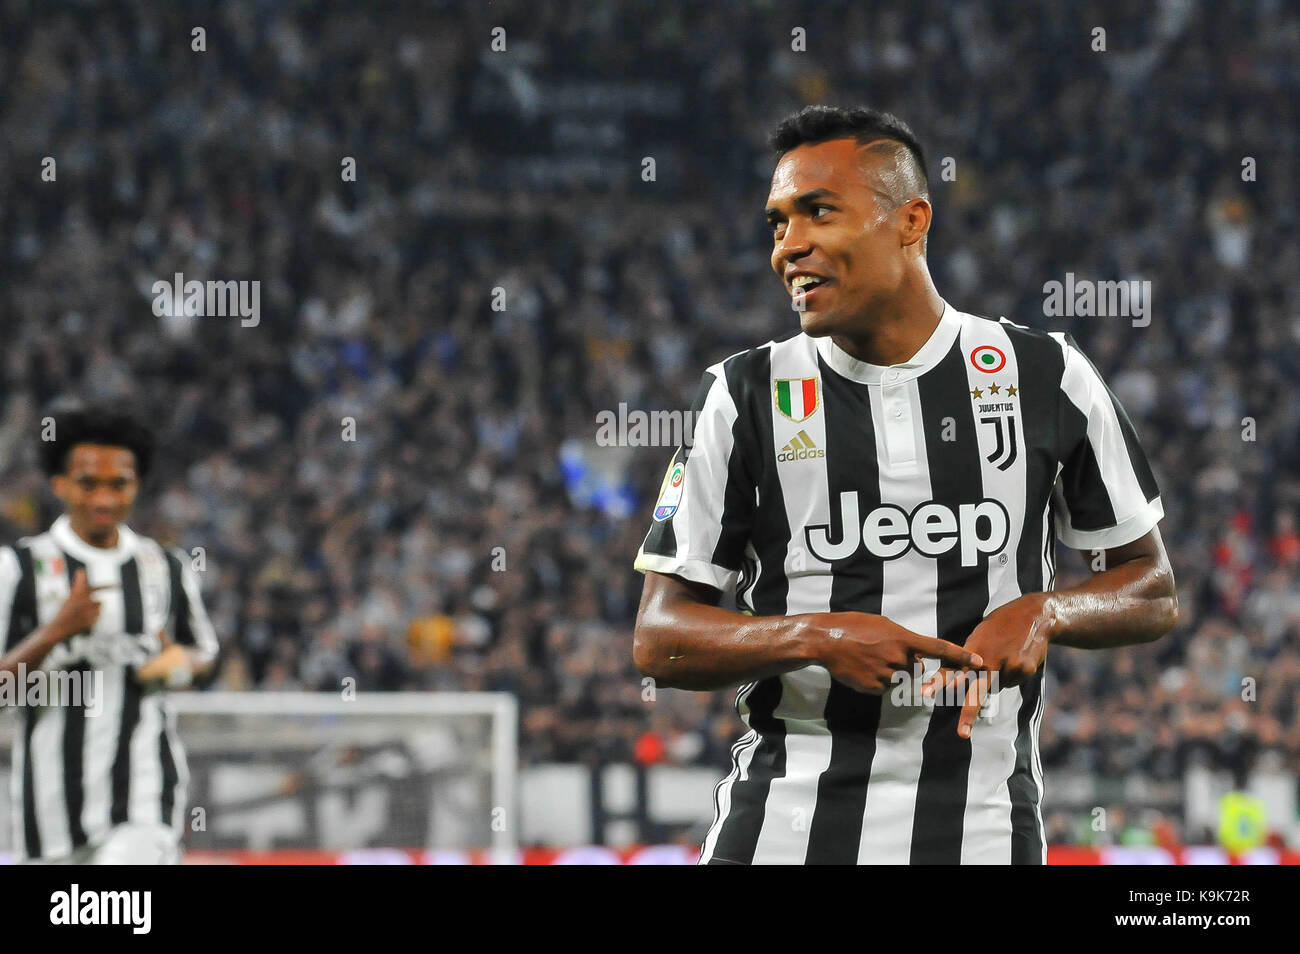 Lobo Silva Alex Sandro (Juventus FC) during the Serie A football match between Juventus FC and  Torino FC at Allianz Stadium on 23 September, 2017 in Turin, Italy. Stock Photo